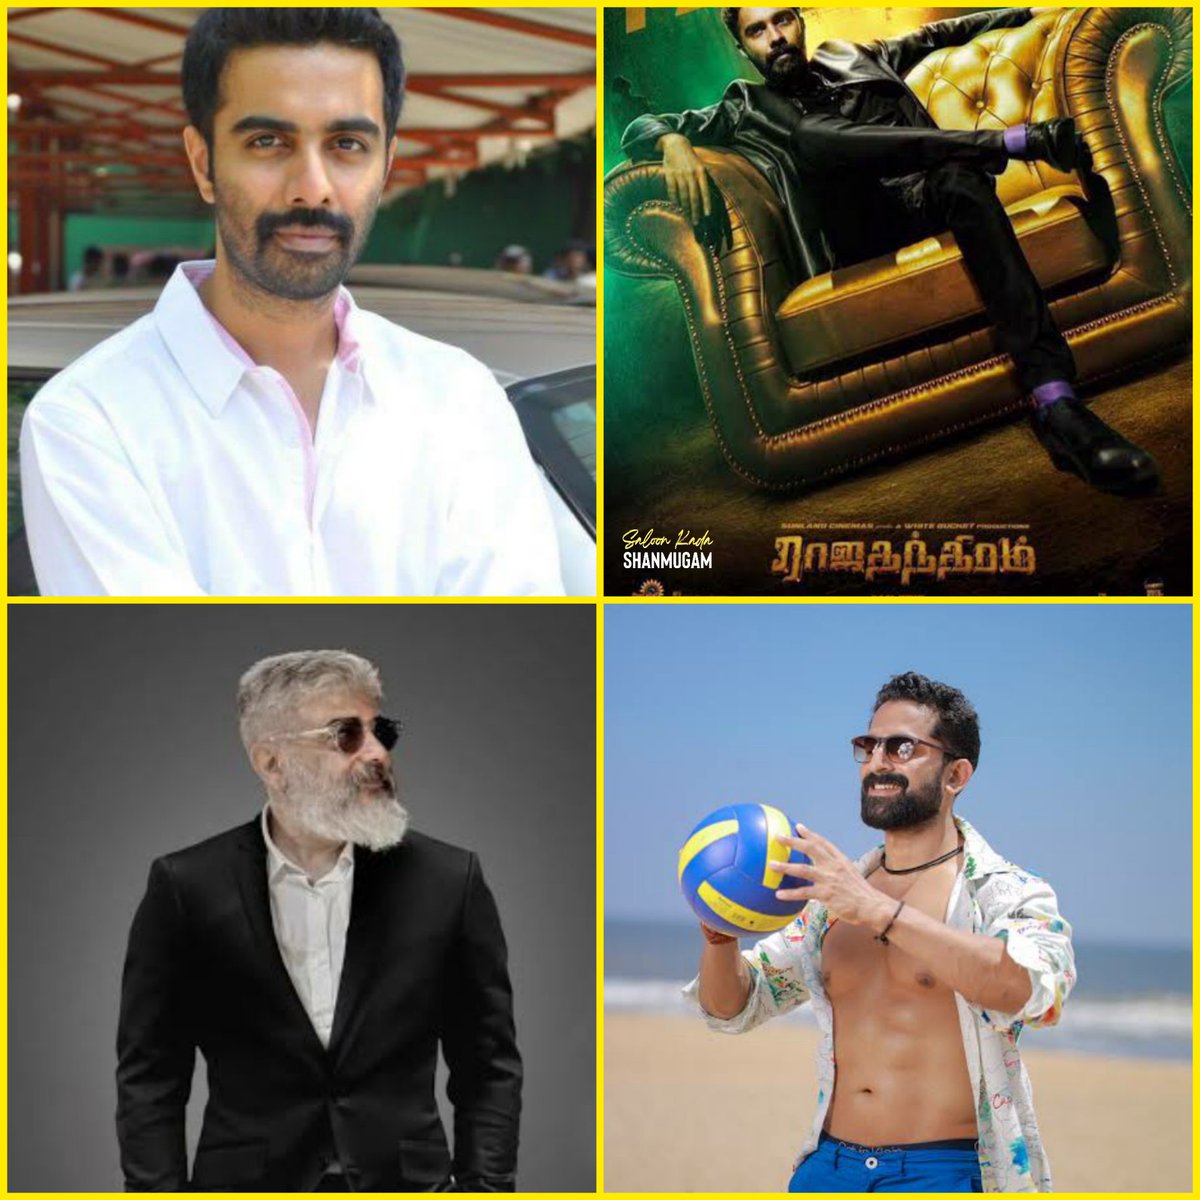 #SaloonUpdate

#AK61 - #Veera On Board 🌟
One Of The Most Talented Actor🔥
He is Well Known For #Rajathandhiram & #NadunisiNaaygal 
He Will be Playing a Important Rol

#AK61 Cast Till Now #AjithKumar - #ManjuWarrier - #Kokken - #Veera

#Ghibran - #HVinoth